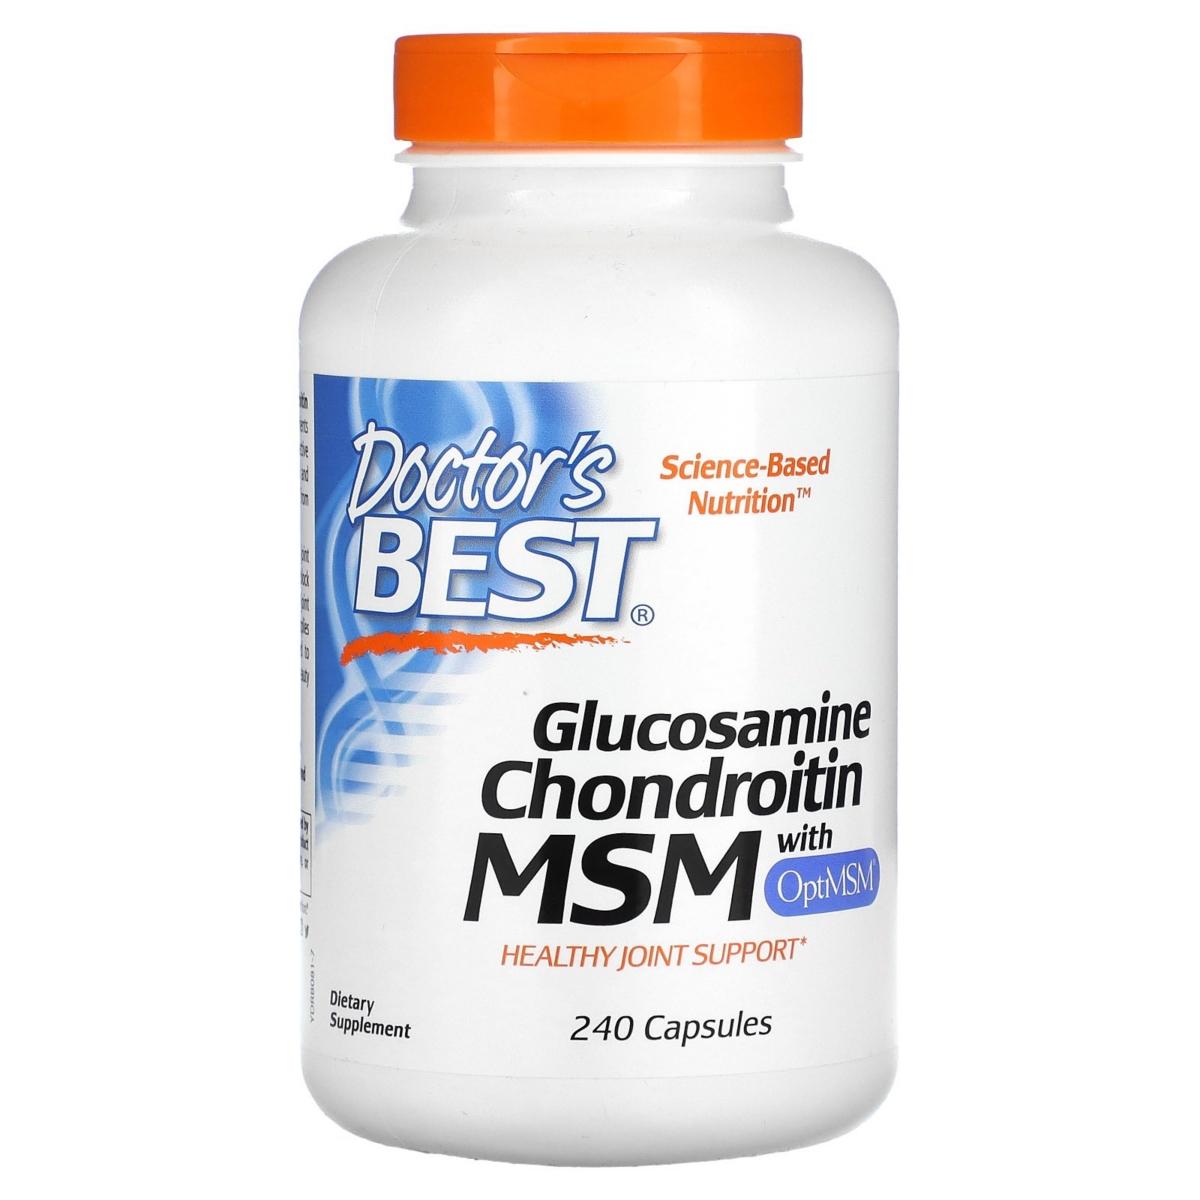 Glucosamine Chondroitin Msm with OptiMSM - 240 Capsules - Assorted Pre-pack (See Table